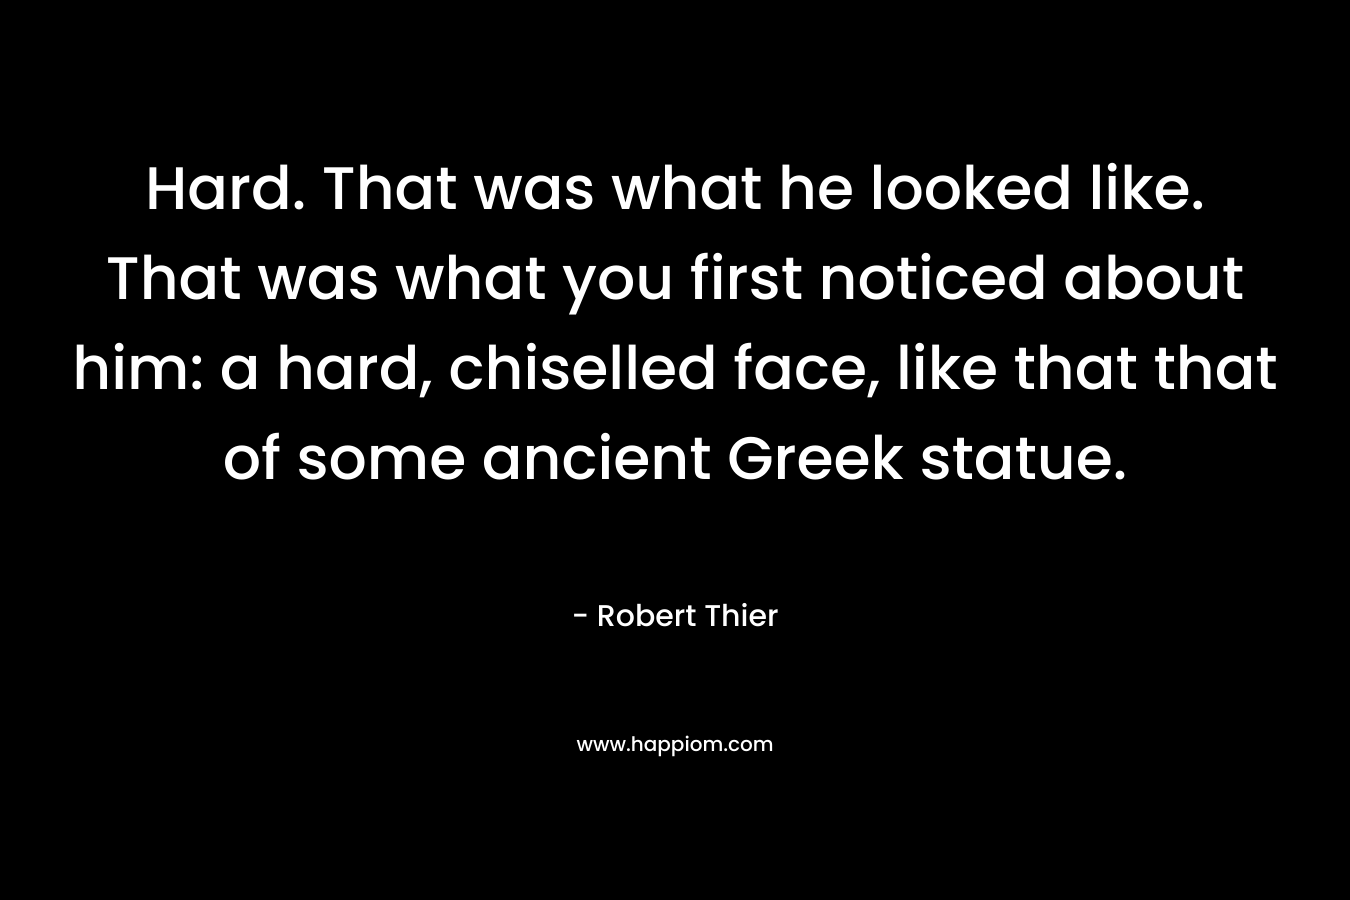 Hard. That was what he looked like. That was what you first noticed about him: a hard, chiselled face, like that that of some ancient Greek statue. – Robert Thier